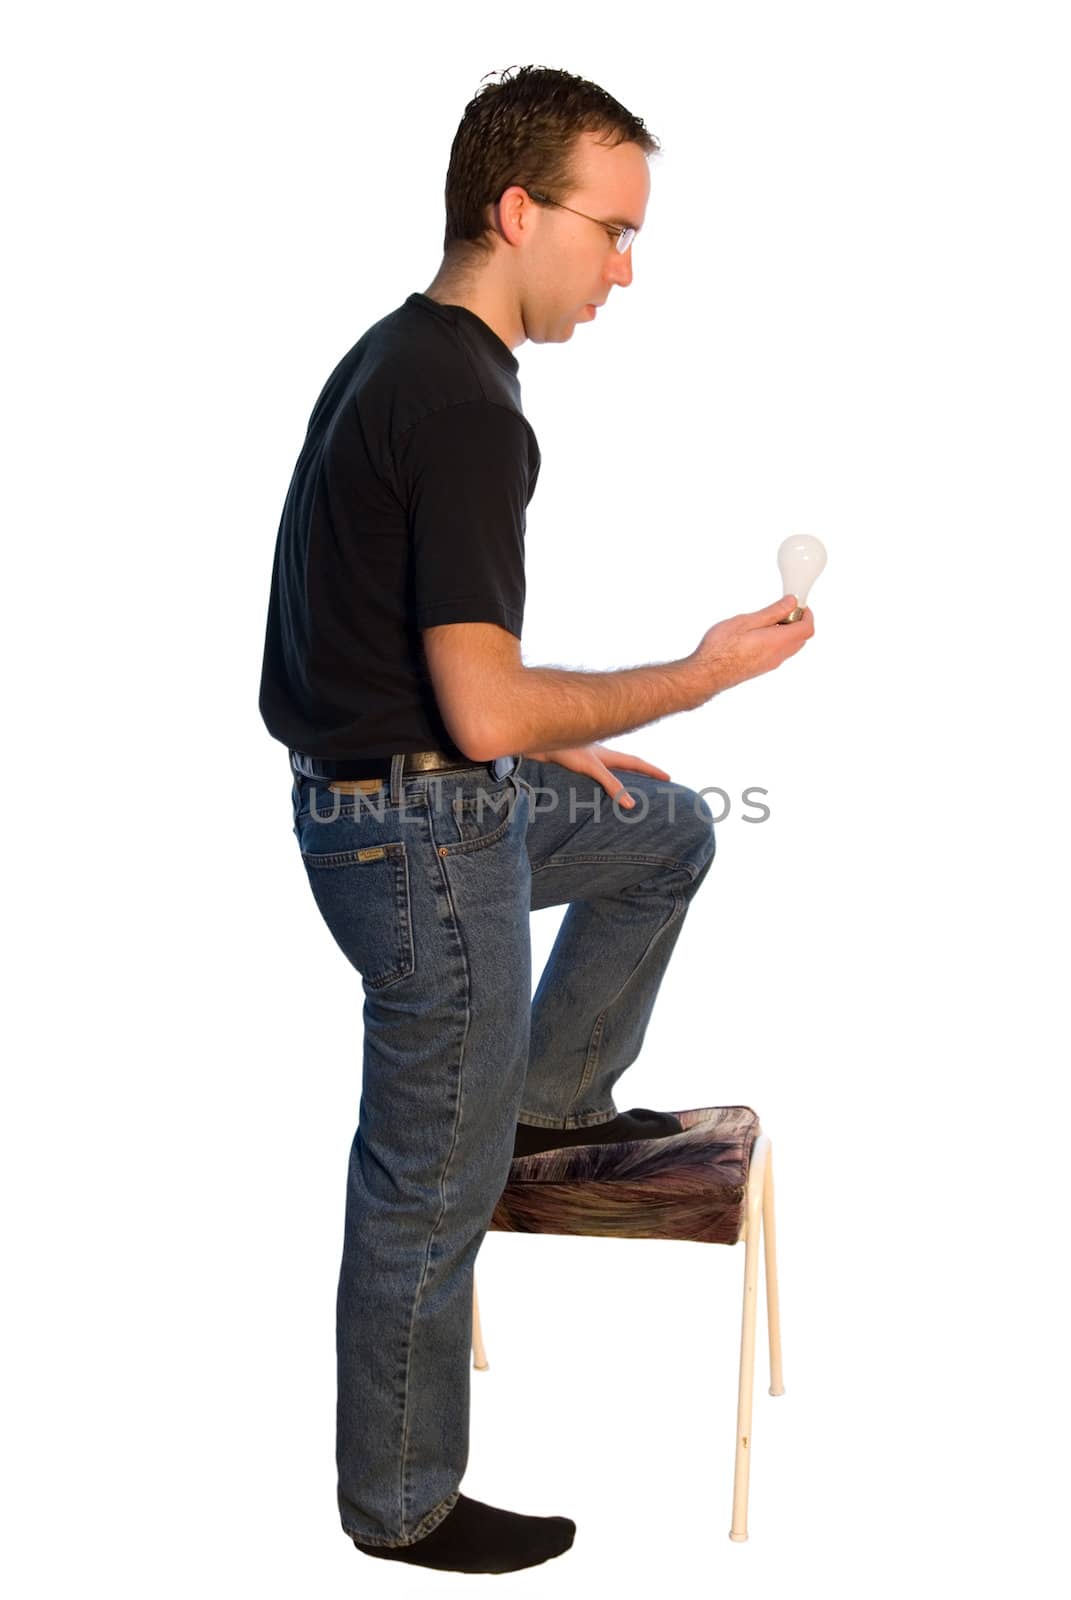 Young man standing on a stool to change a lightbulb